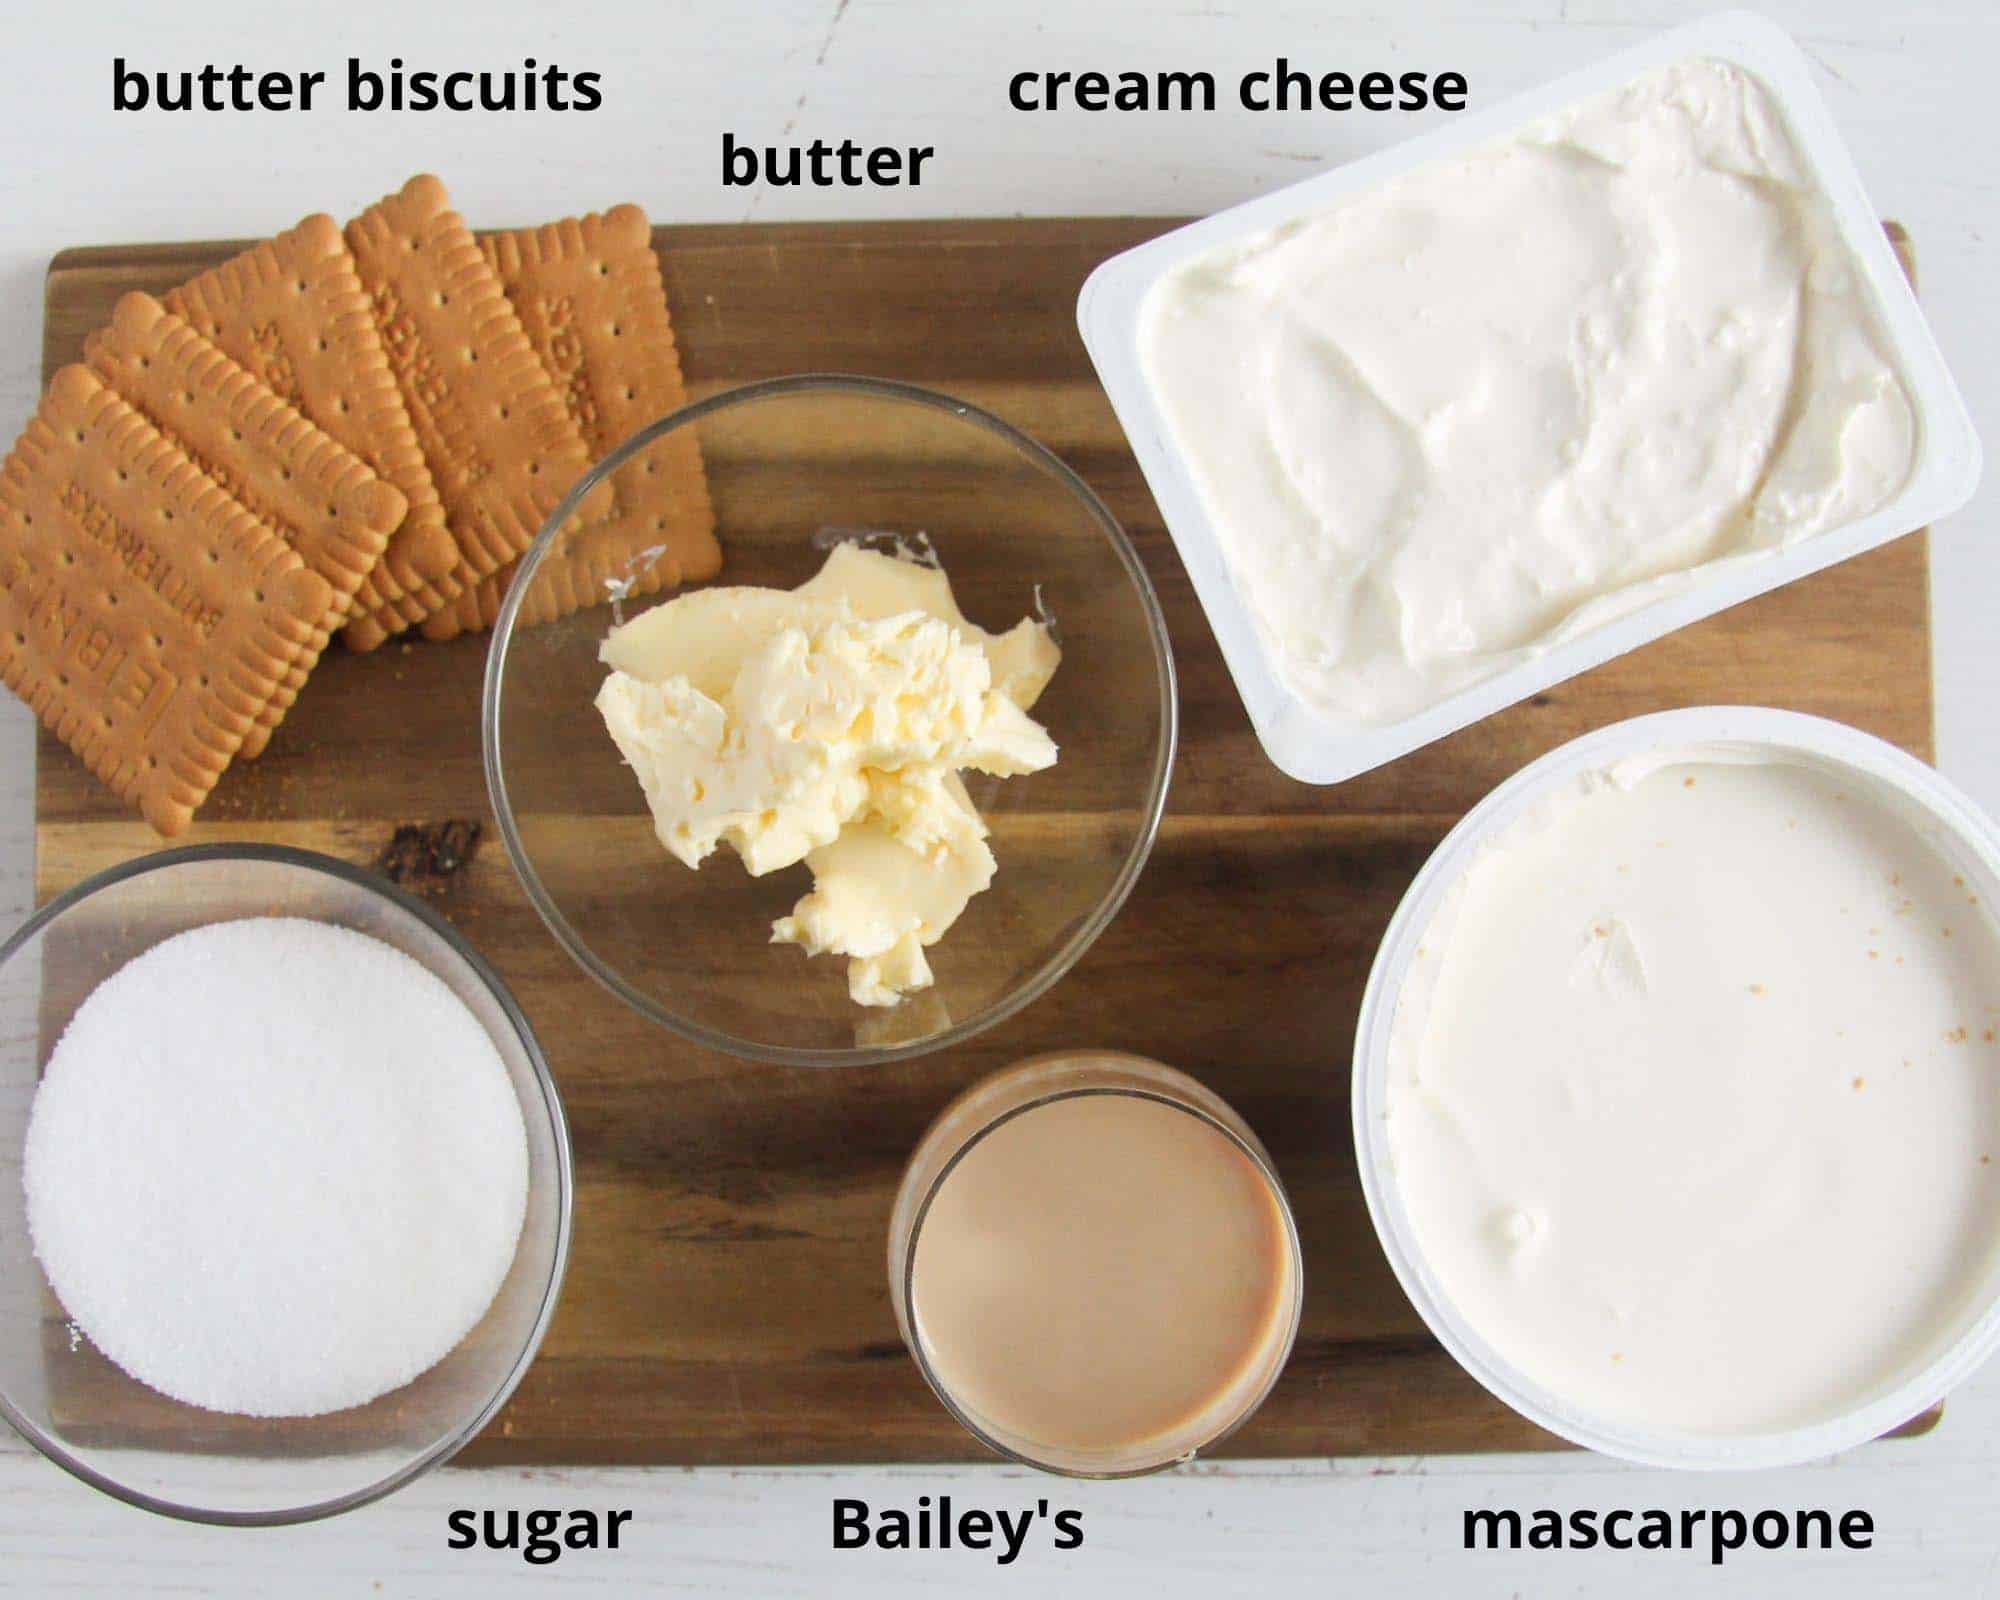 biscuits, cream cheese, mascarpone, sugar, butter, baileys on a wooden board.